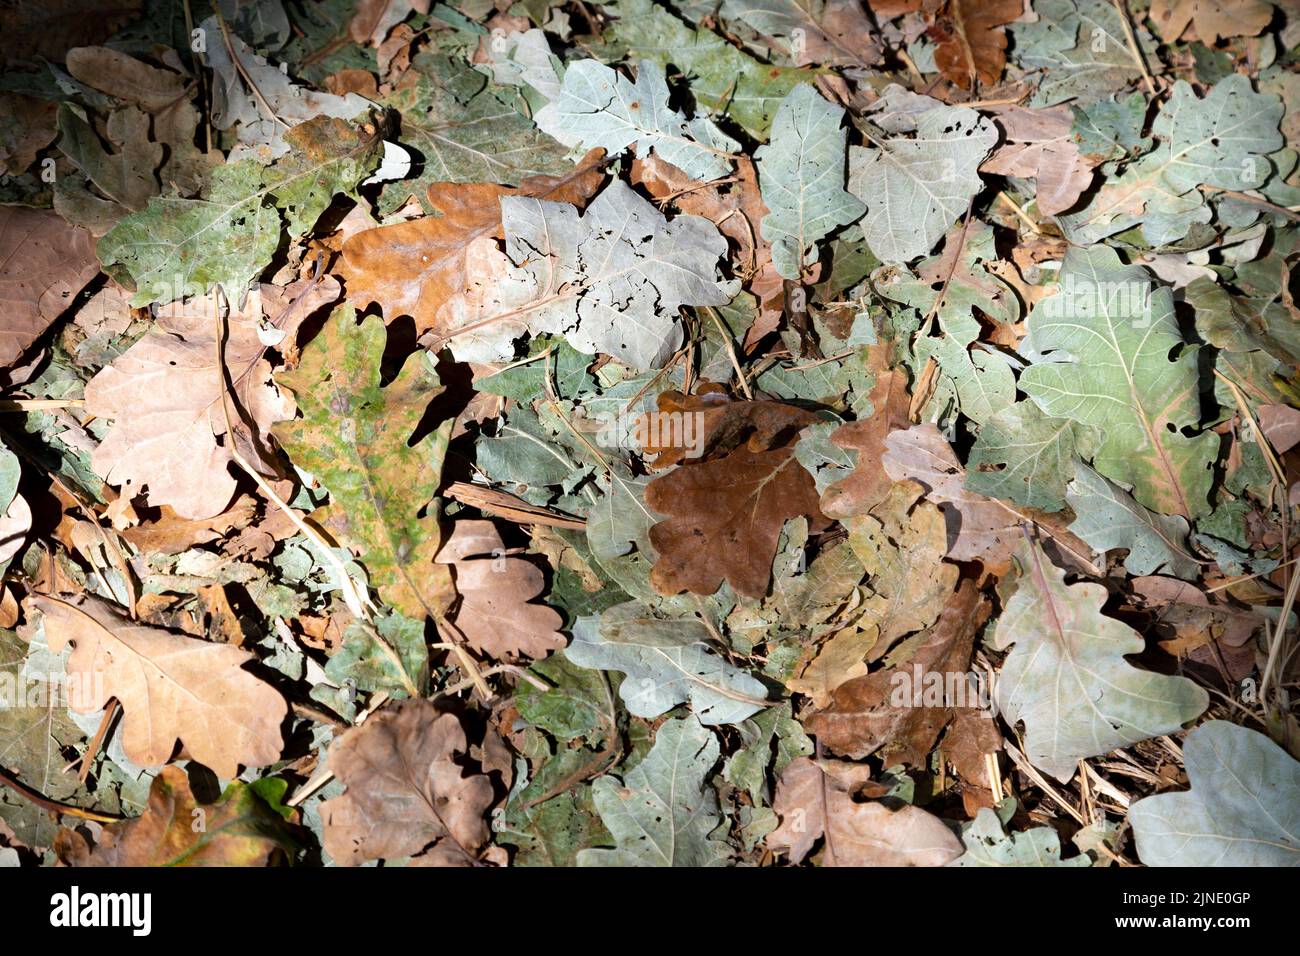 9 August 2022, London, UK - Green leaves dried from the sun and heat fallen from trees in the summer at Wanstead Flats during recent period of high temperatures Stock Photo